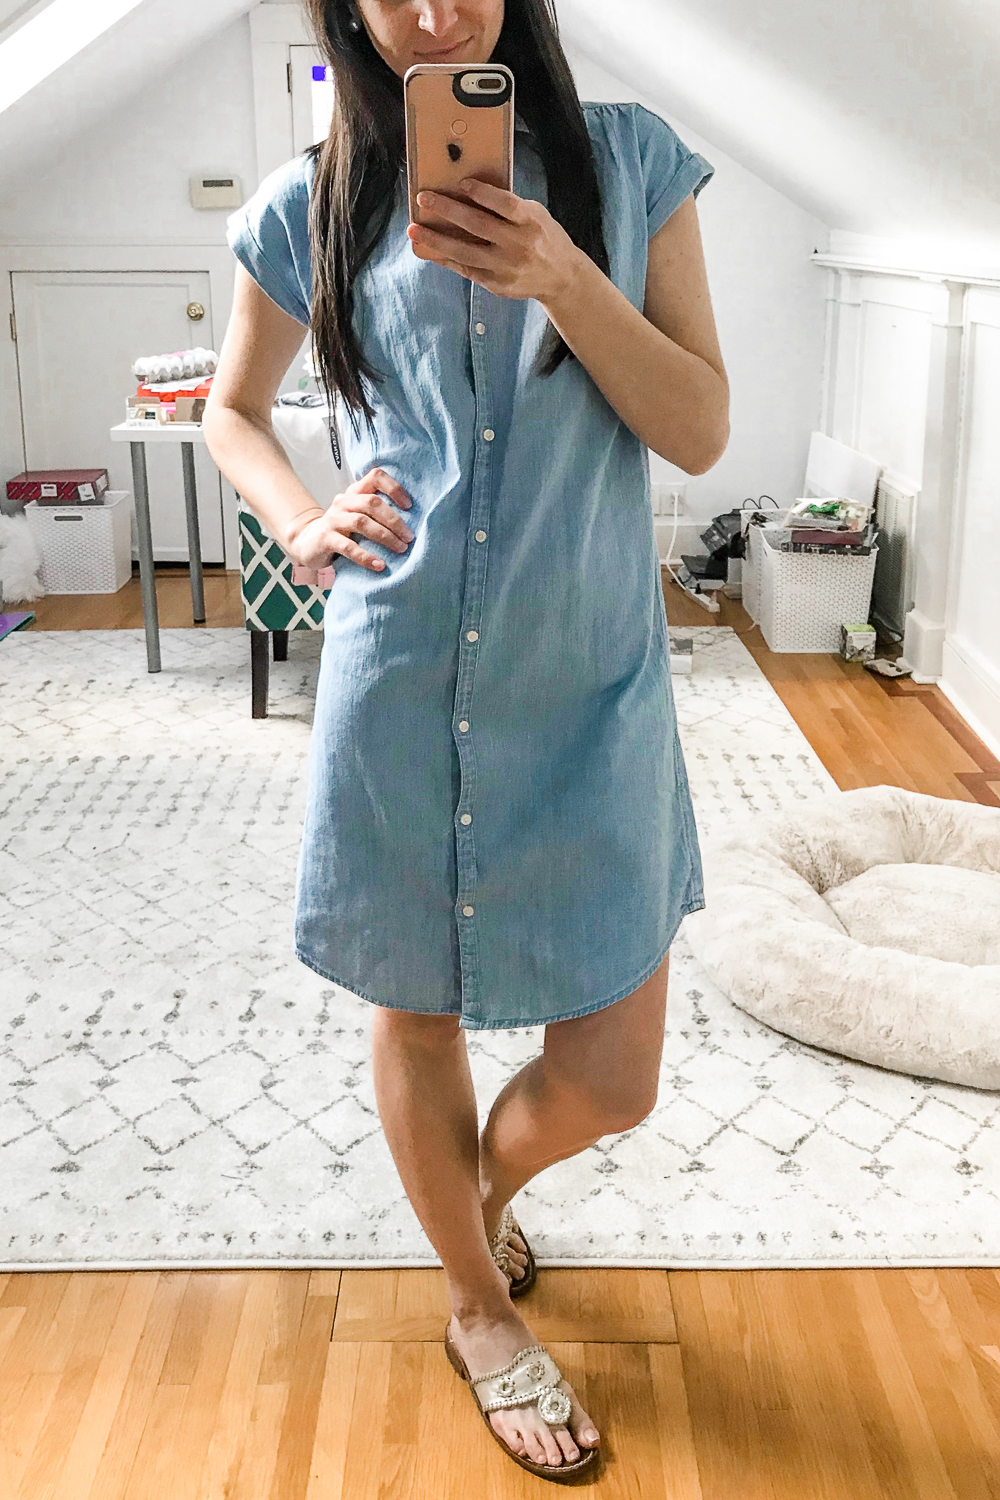 Old Navy Chambray Shirt Dress, Old Navy Try-On Haul: Best of Spring 2019 by Stephanie Ziajka from the popular affordable fashion blog Diary of a Debutante, Old Navy Spring 2019 Try-On Haul, Spring Try-On Haul